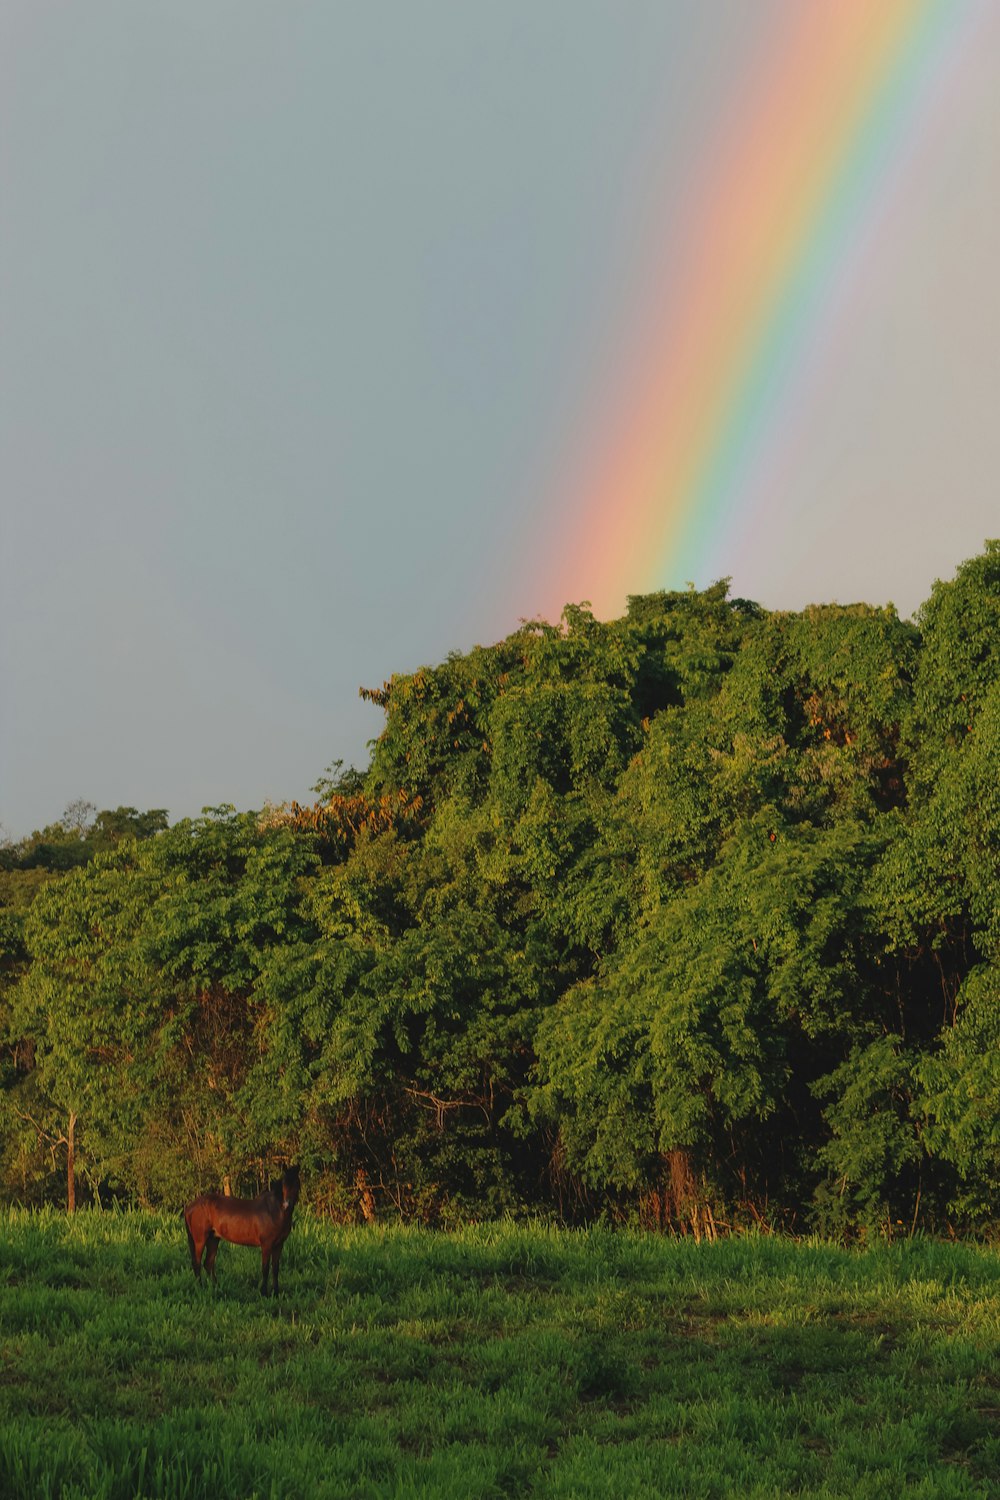 a rainbow over a horse in a field